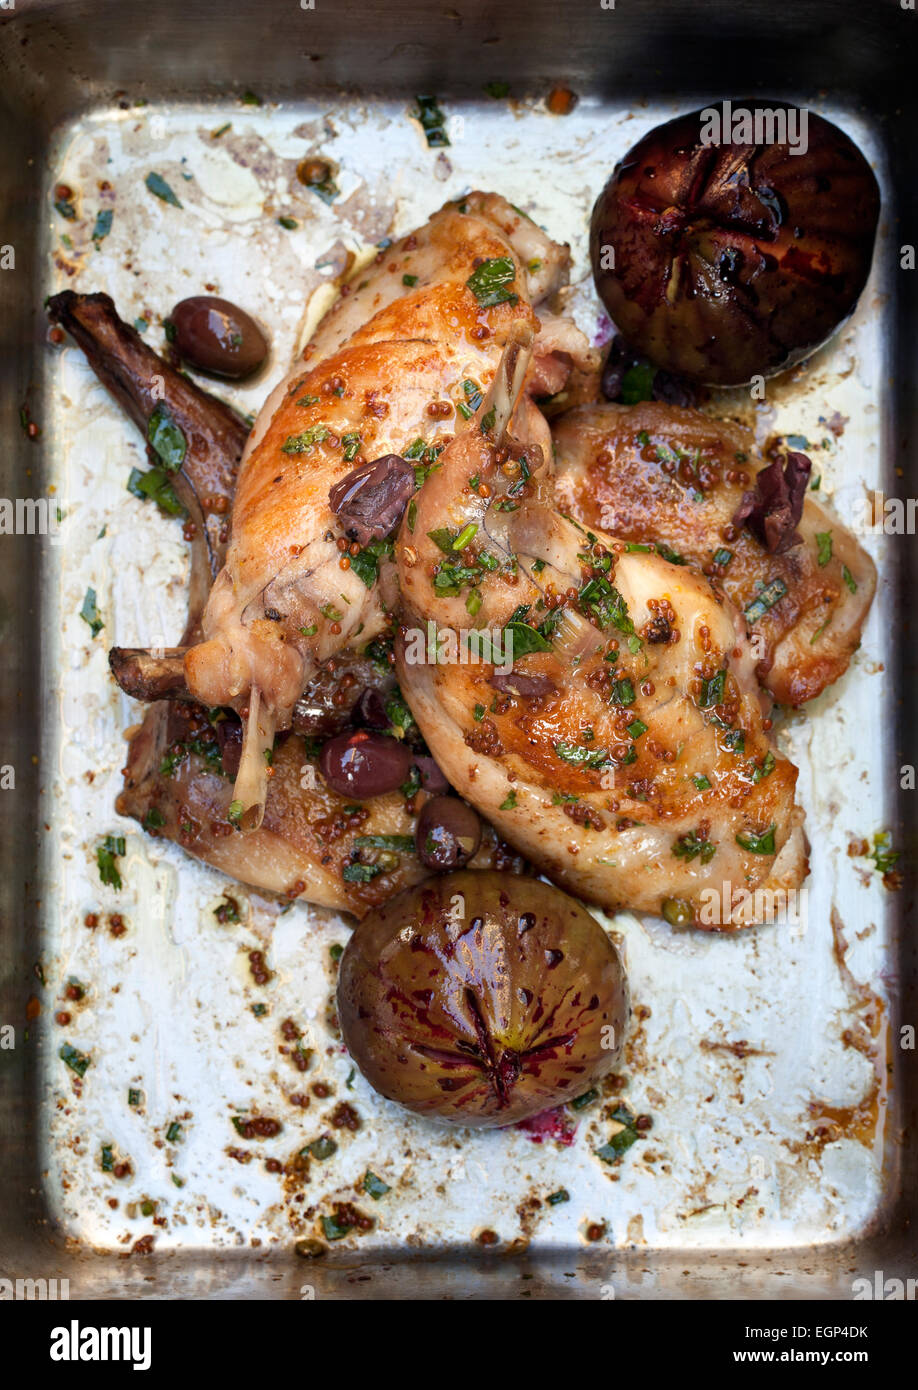 Roast Chicken with Figs and Olives Stock Photo